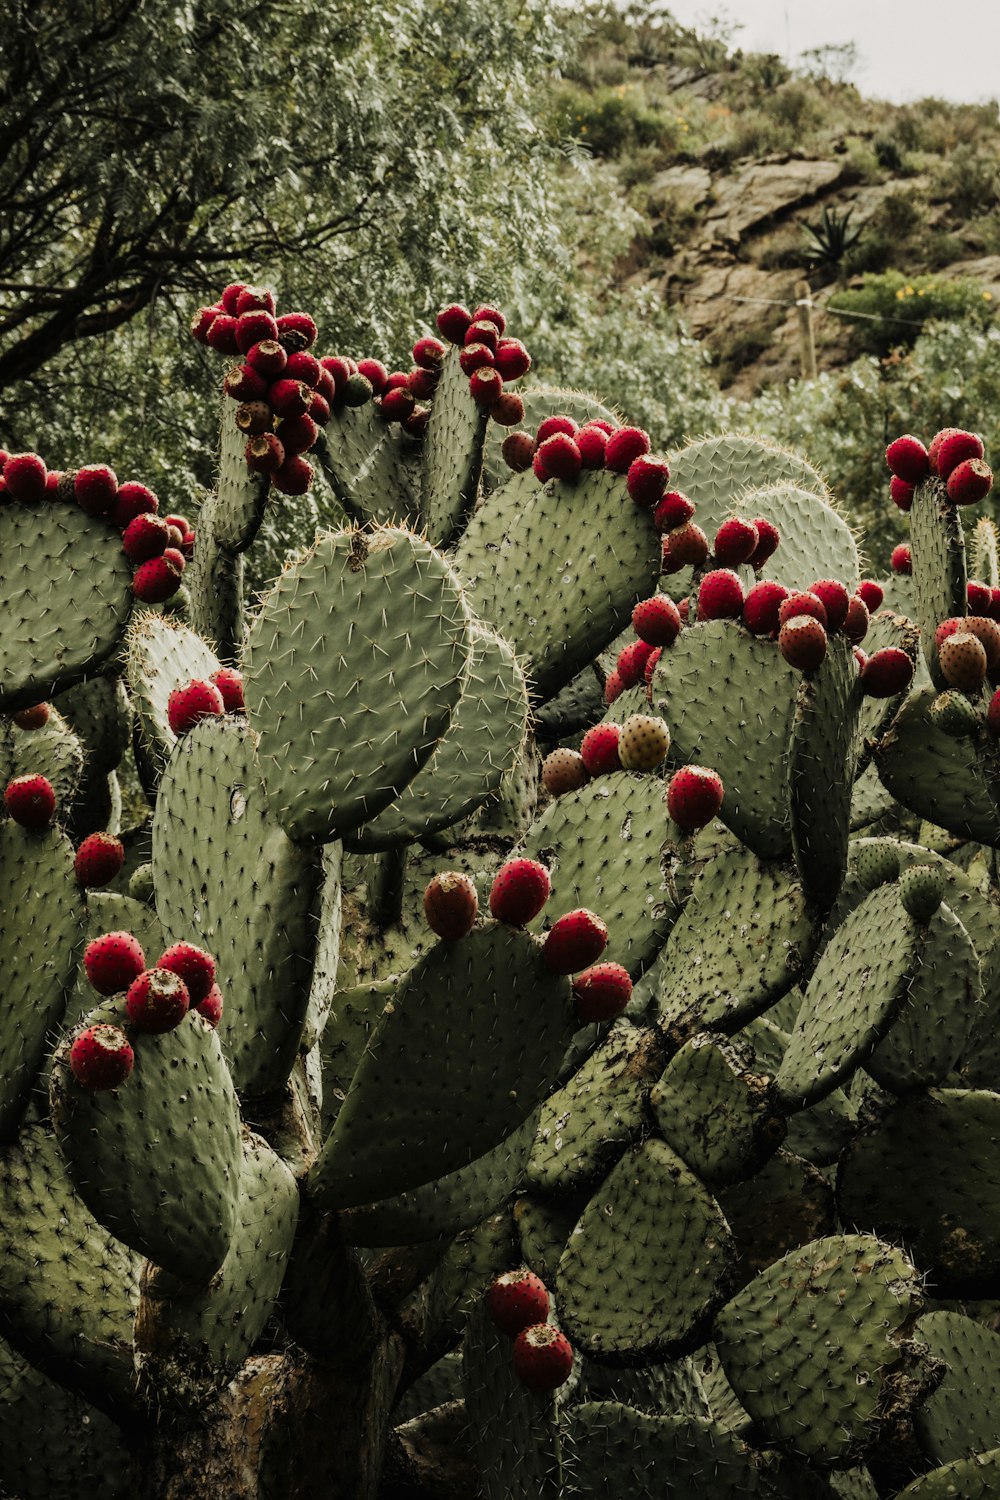 a large cactus with red fruit on it